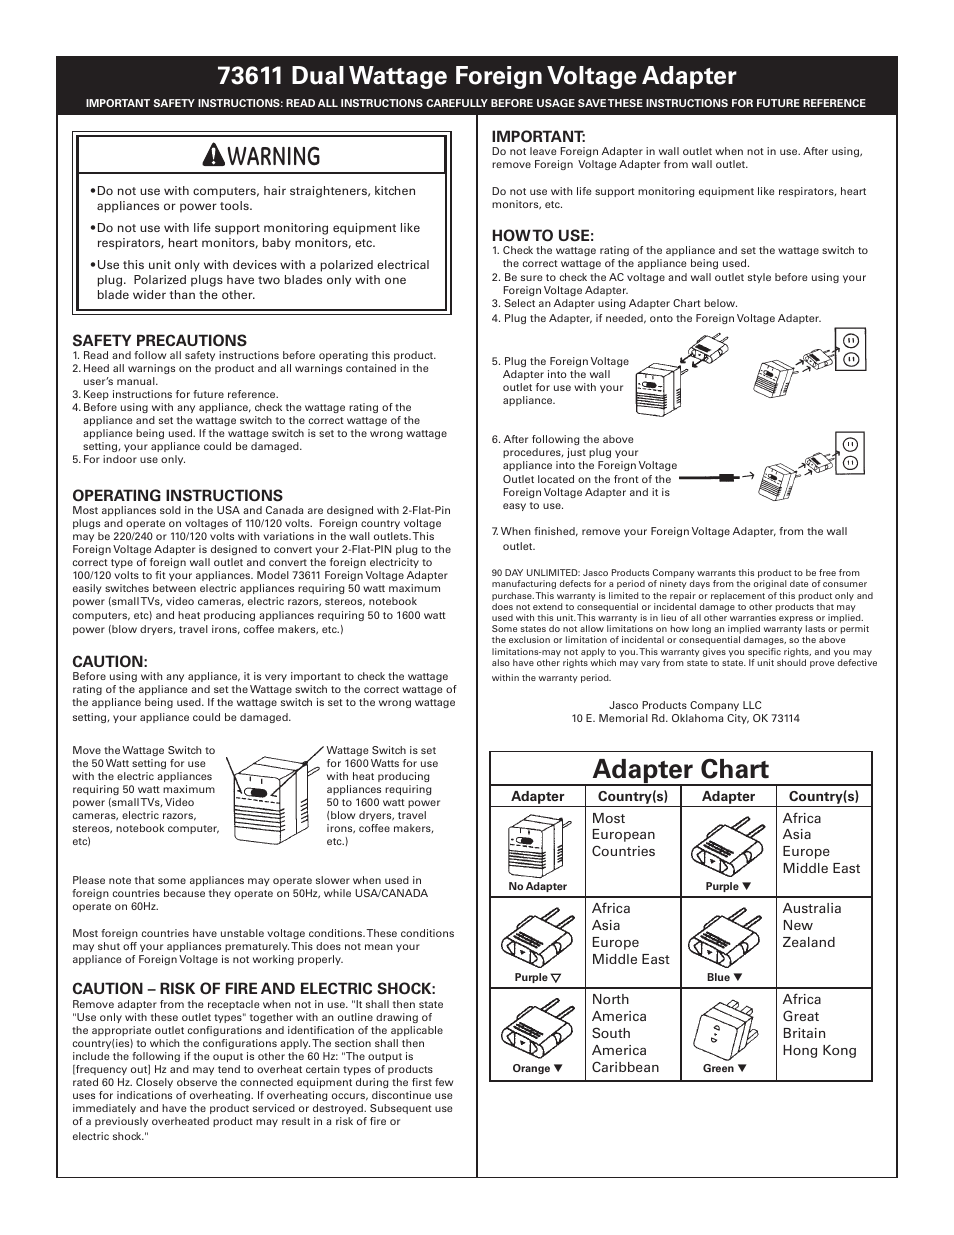 GE 73611 Foreign Voltage Adapter User Manual | 2 pages